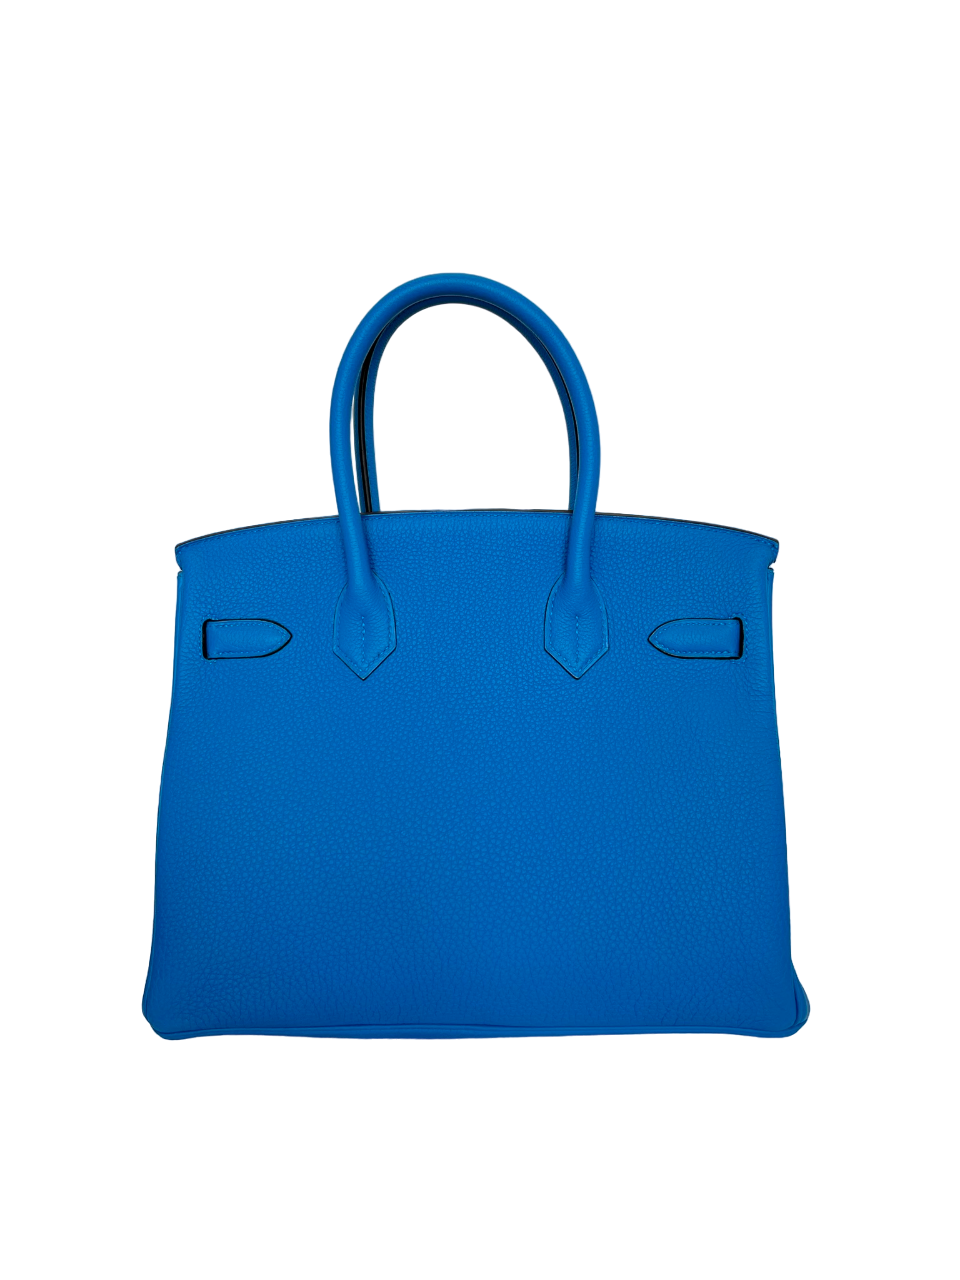 HERMES Birkin 30 - aptiques by Authentic PreOwned